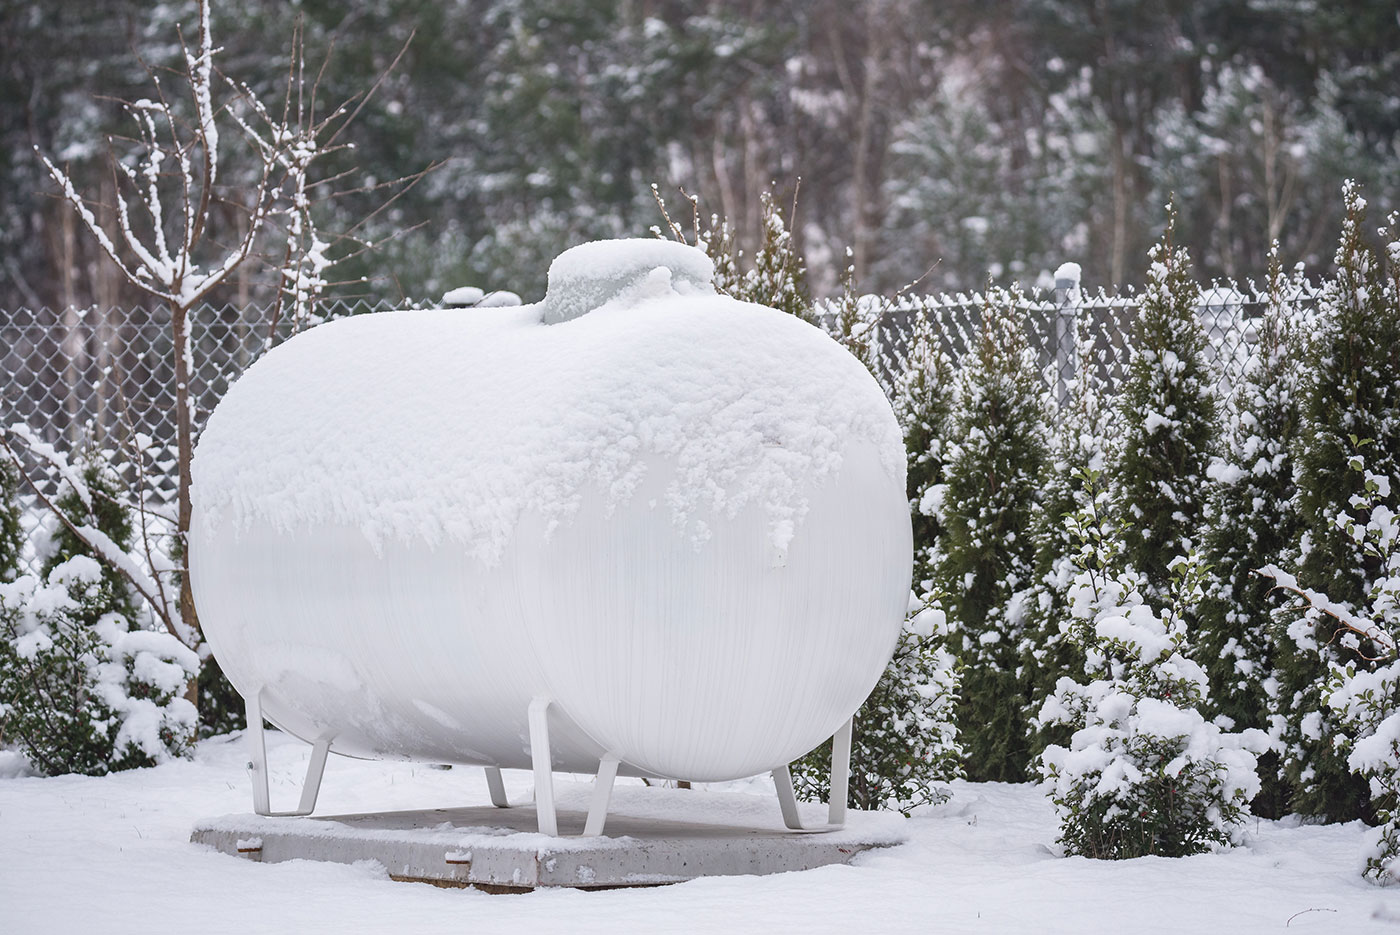 How to Prevent your Oil Tank from Freezing this Winter?